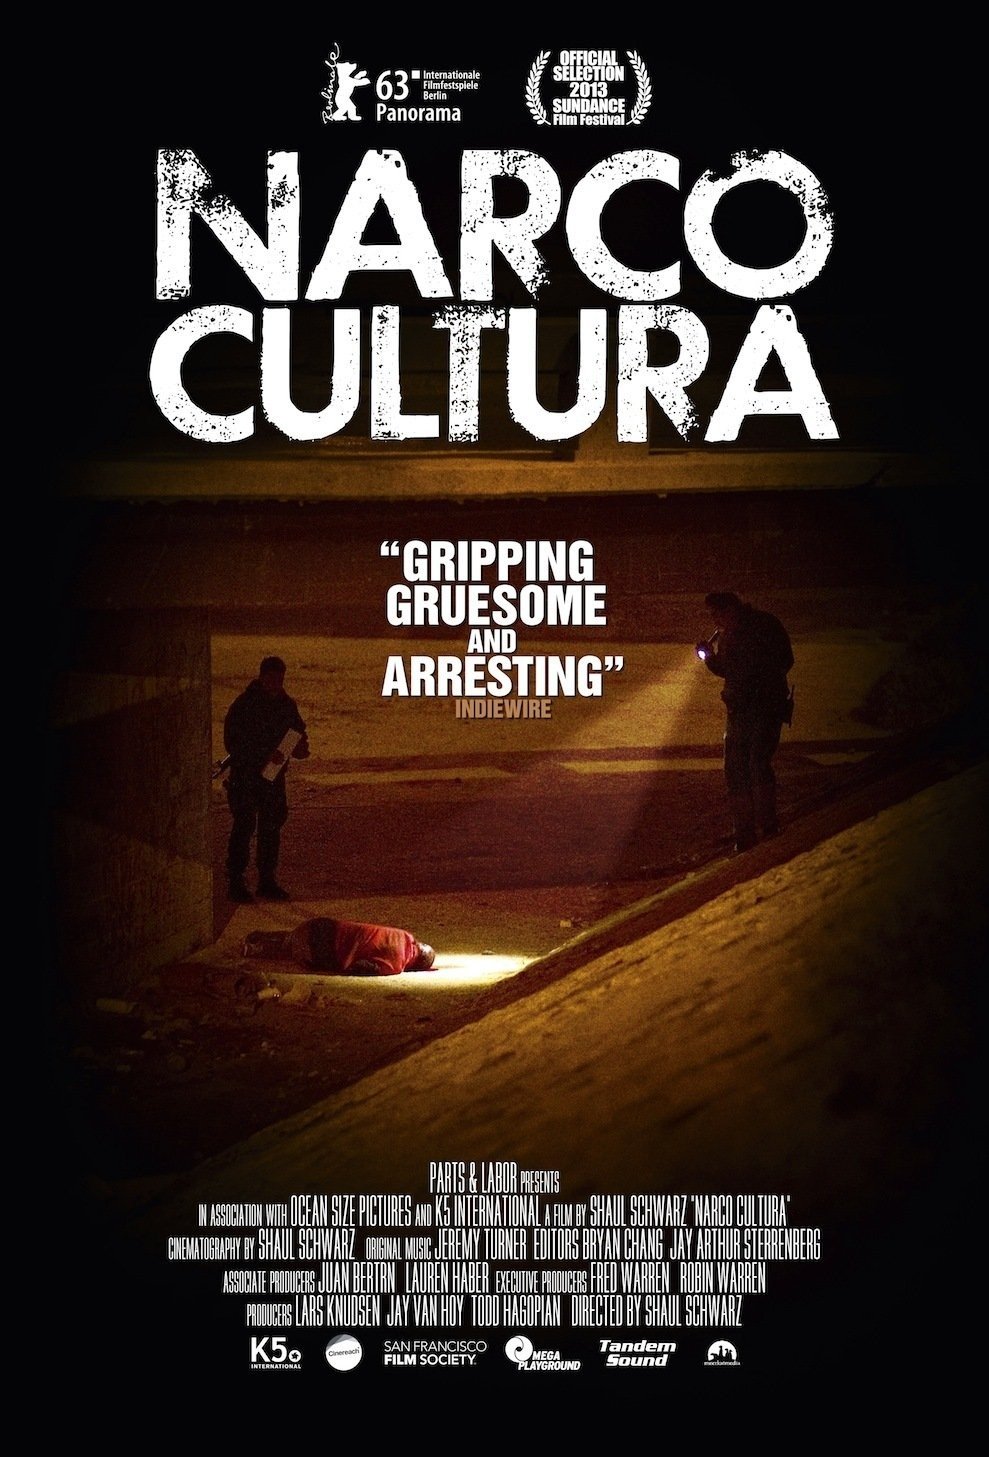 Poster of the movie Narco Cultura